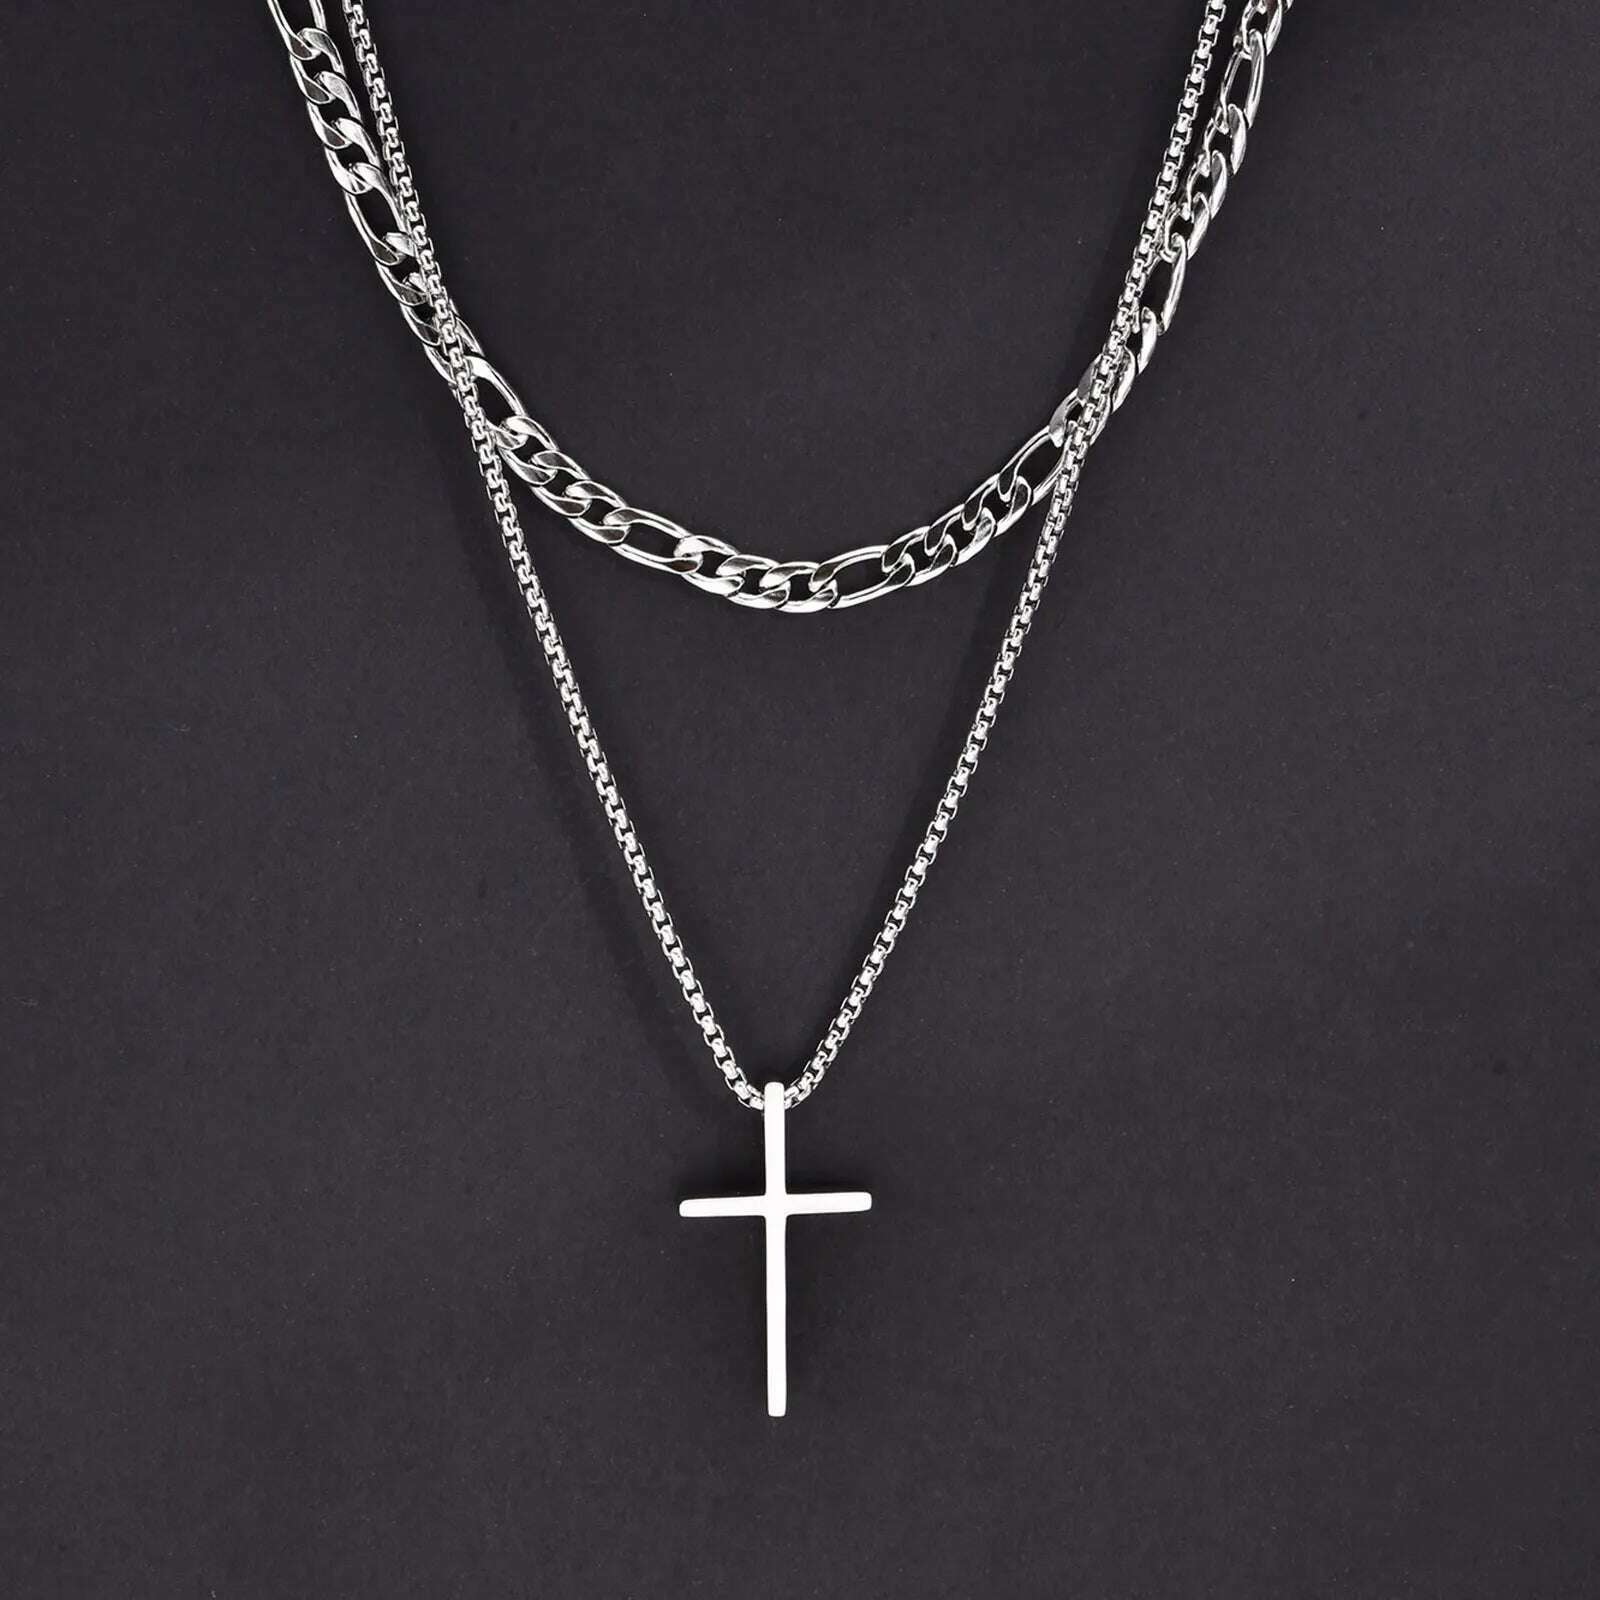 KIMLUD, Vnox Mens Cross Necklaces, Stainless Steel Layered Plain Cross Pendant, Rope Box Chain Necklace, Simple Prayer Jesus Collar, NC-1035S NC-158-50S, KIMLUD Women's Clothes